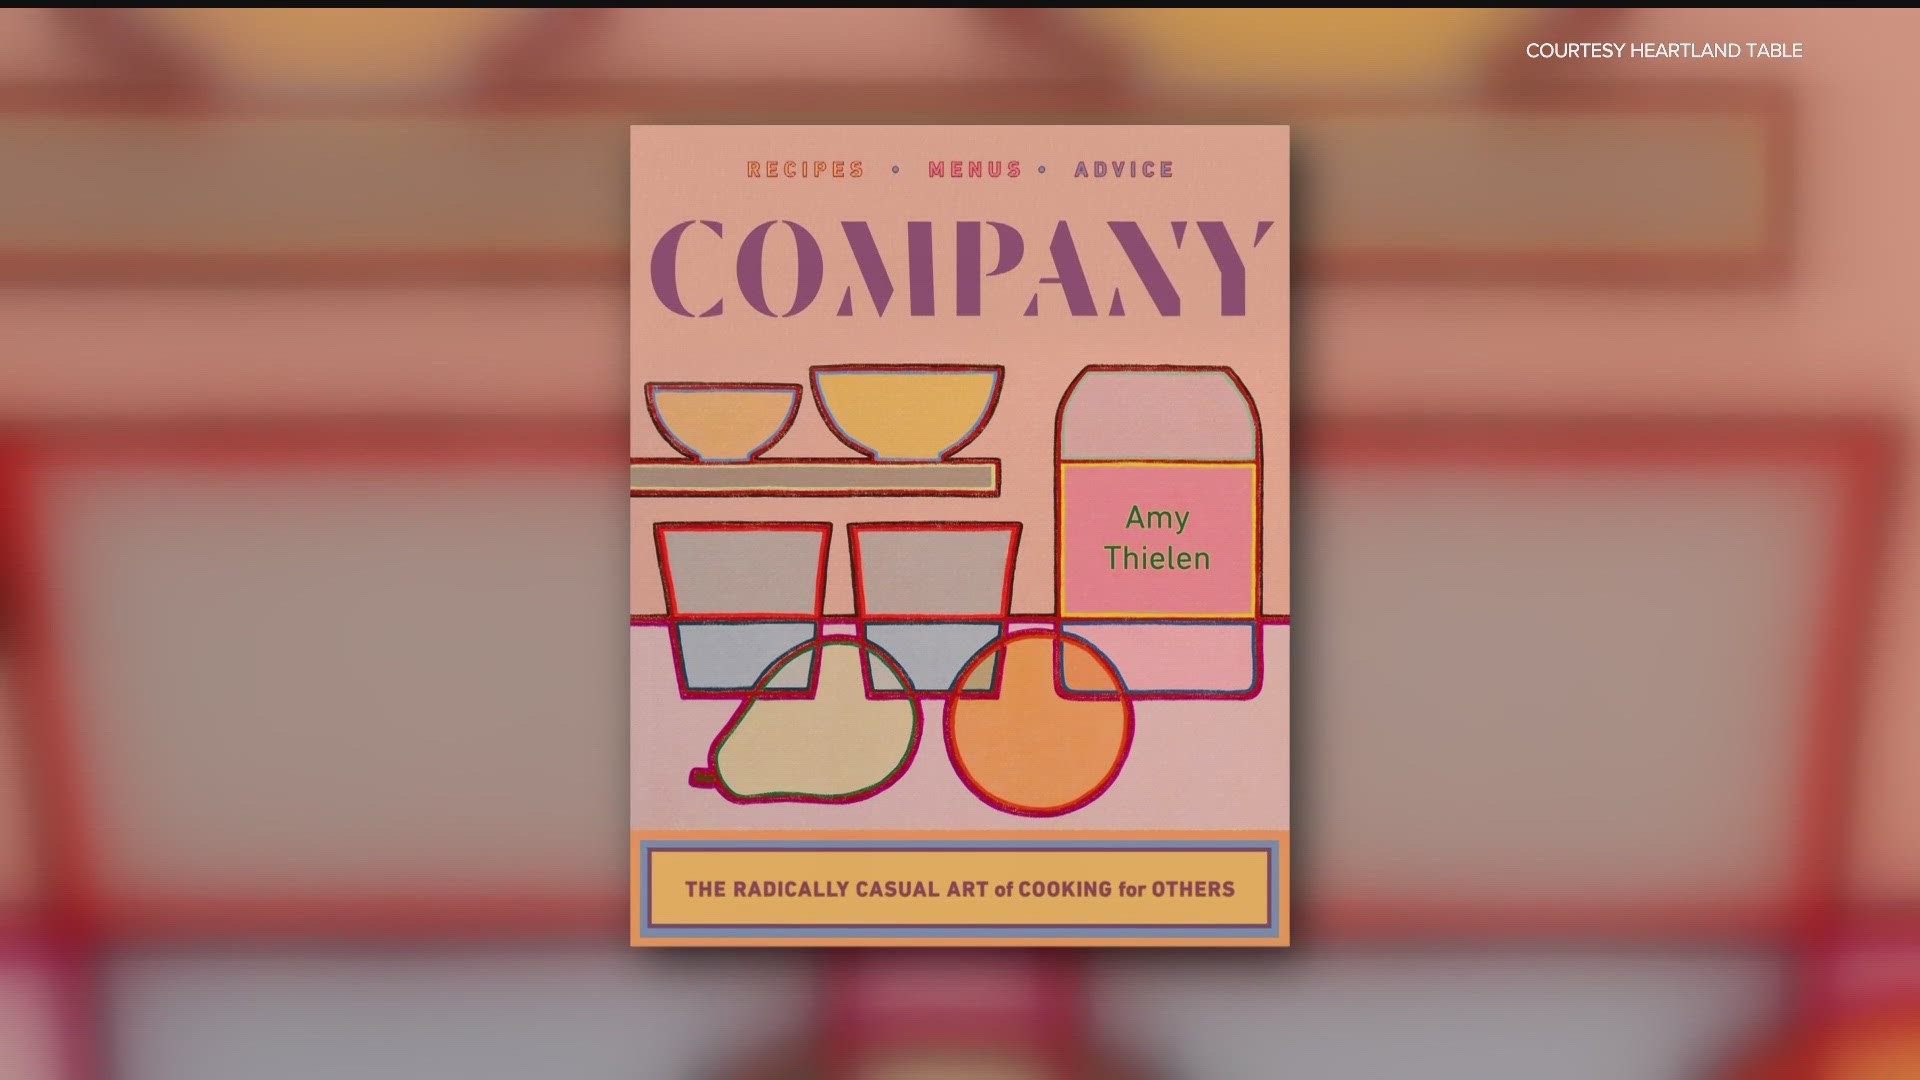 Cookbook author Amy Thielen shared this recipe from her new book, "Company."